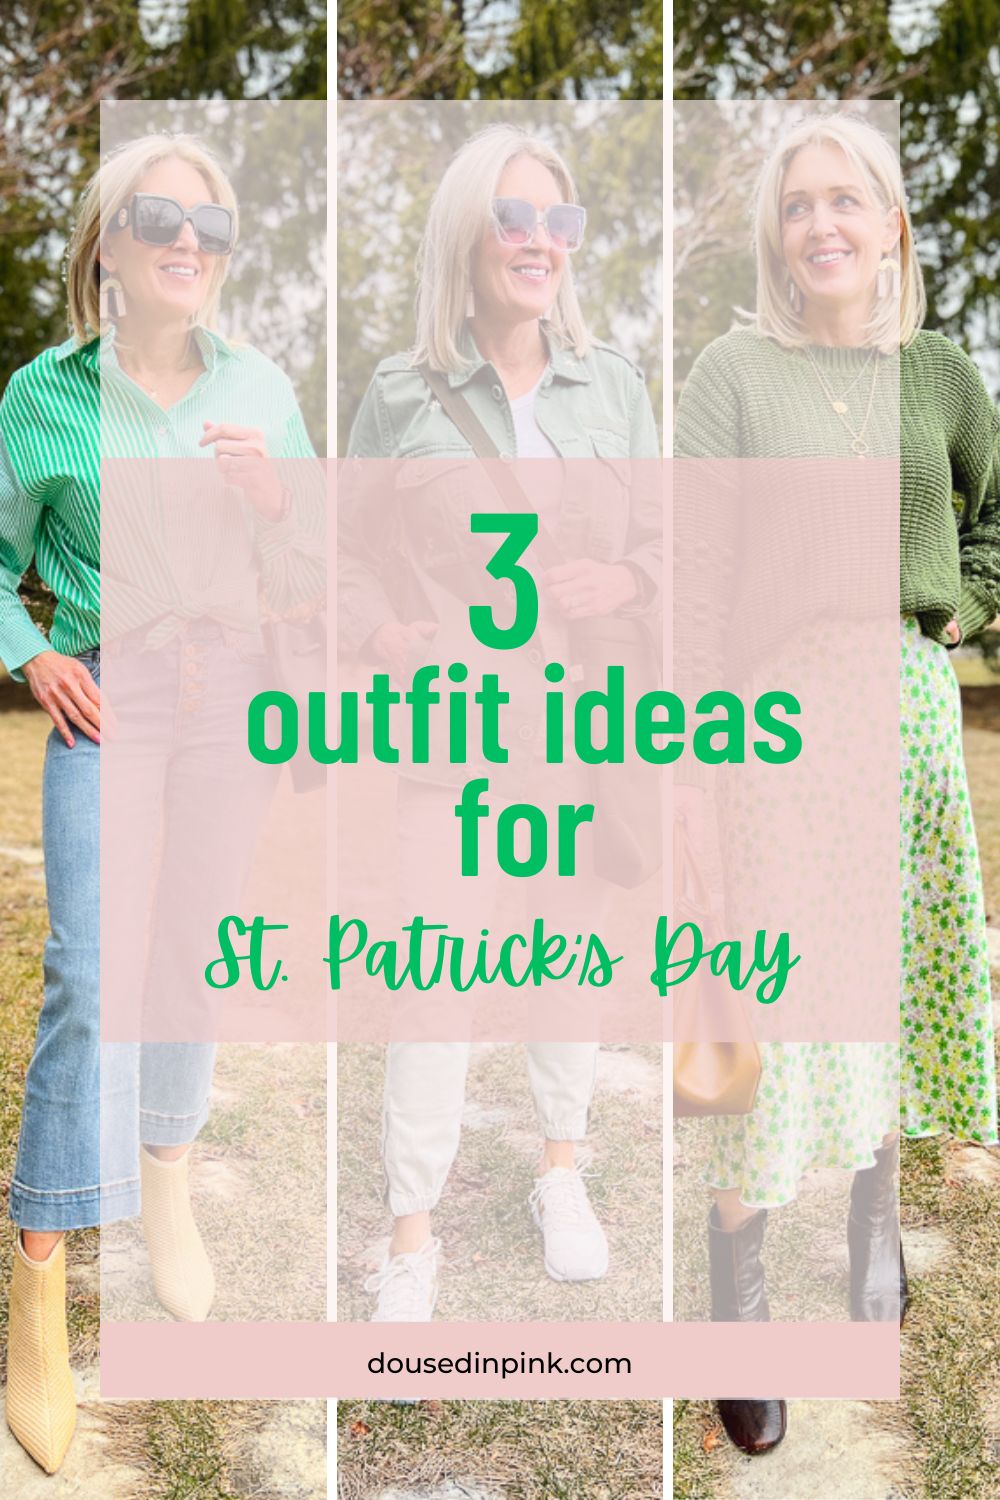 3 outfits for St. Patrick's Day